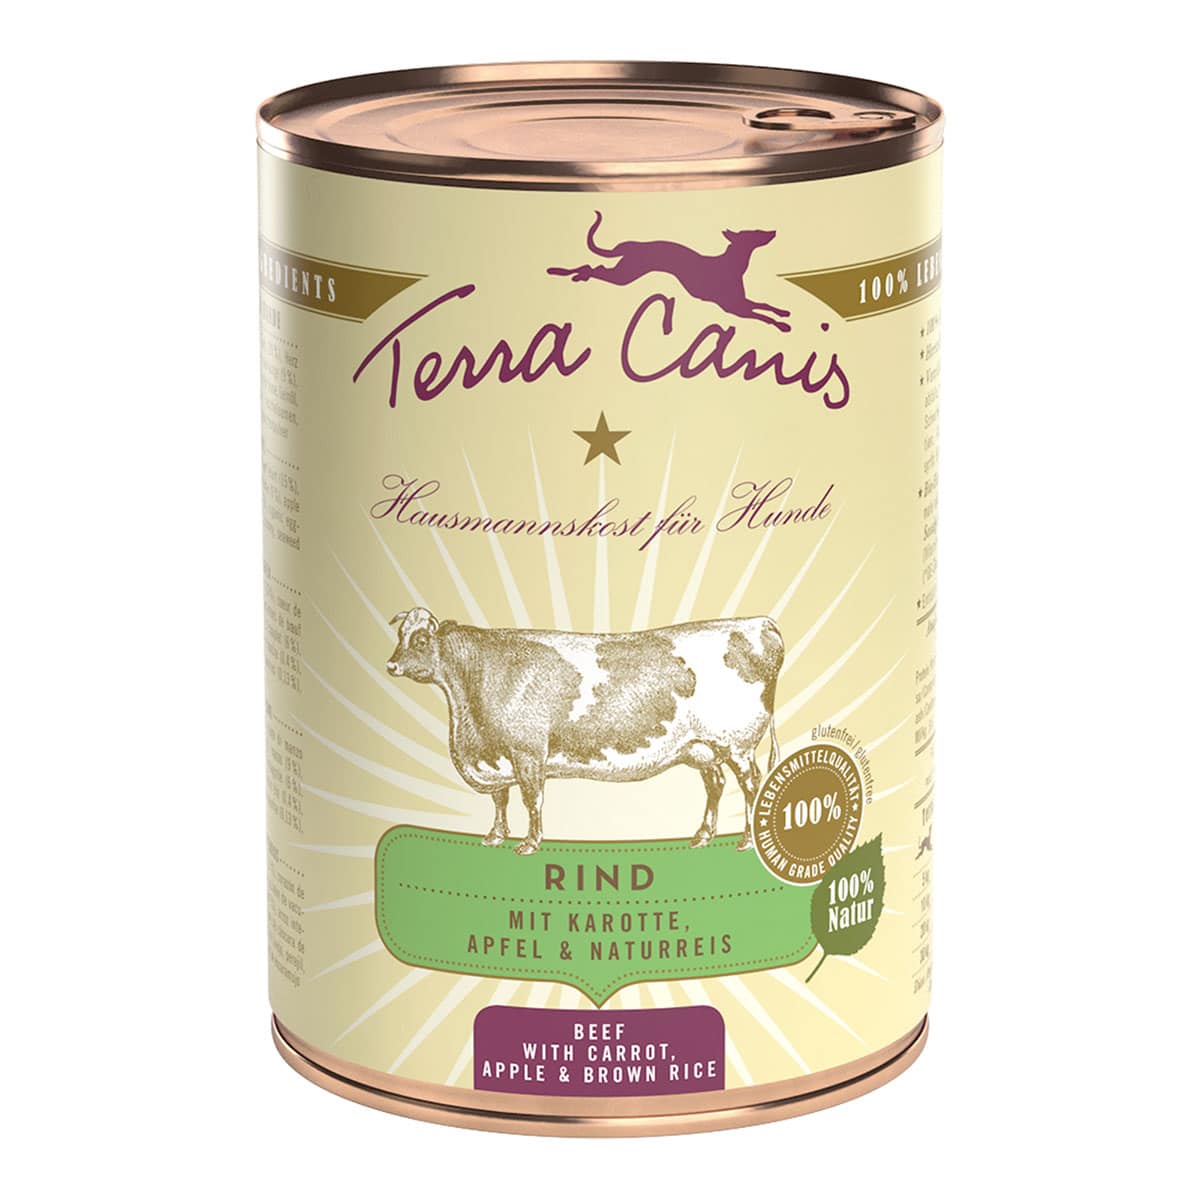 Terra Canis CLASSIC - Rind mit Karotte